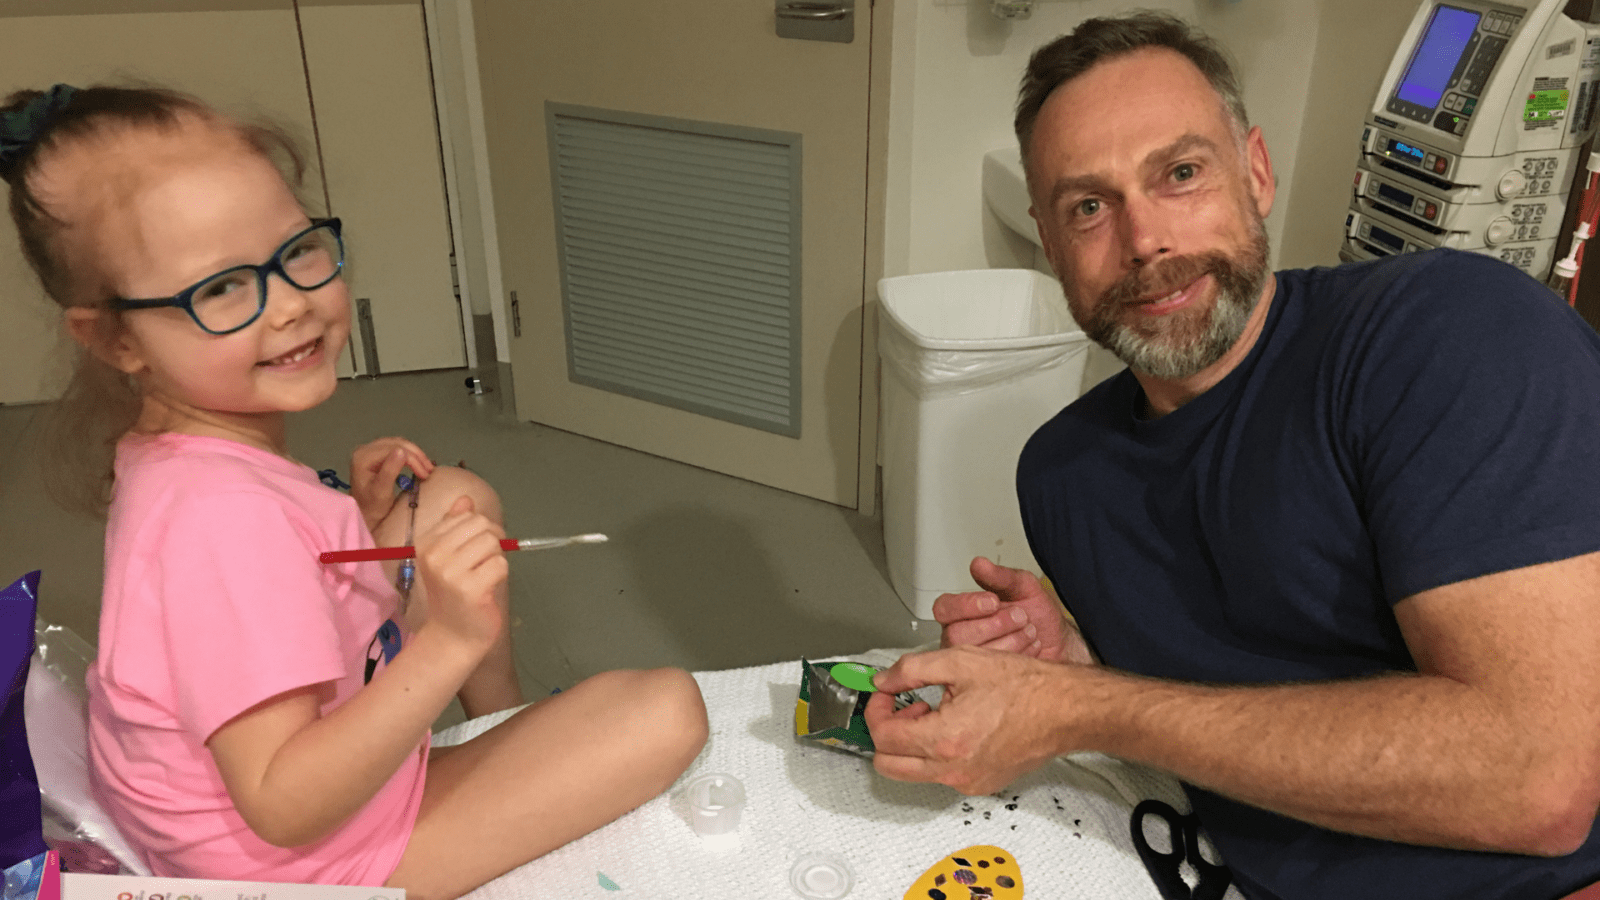 Childhood cancer: A father's perspective